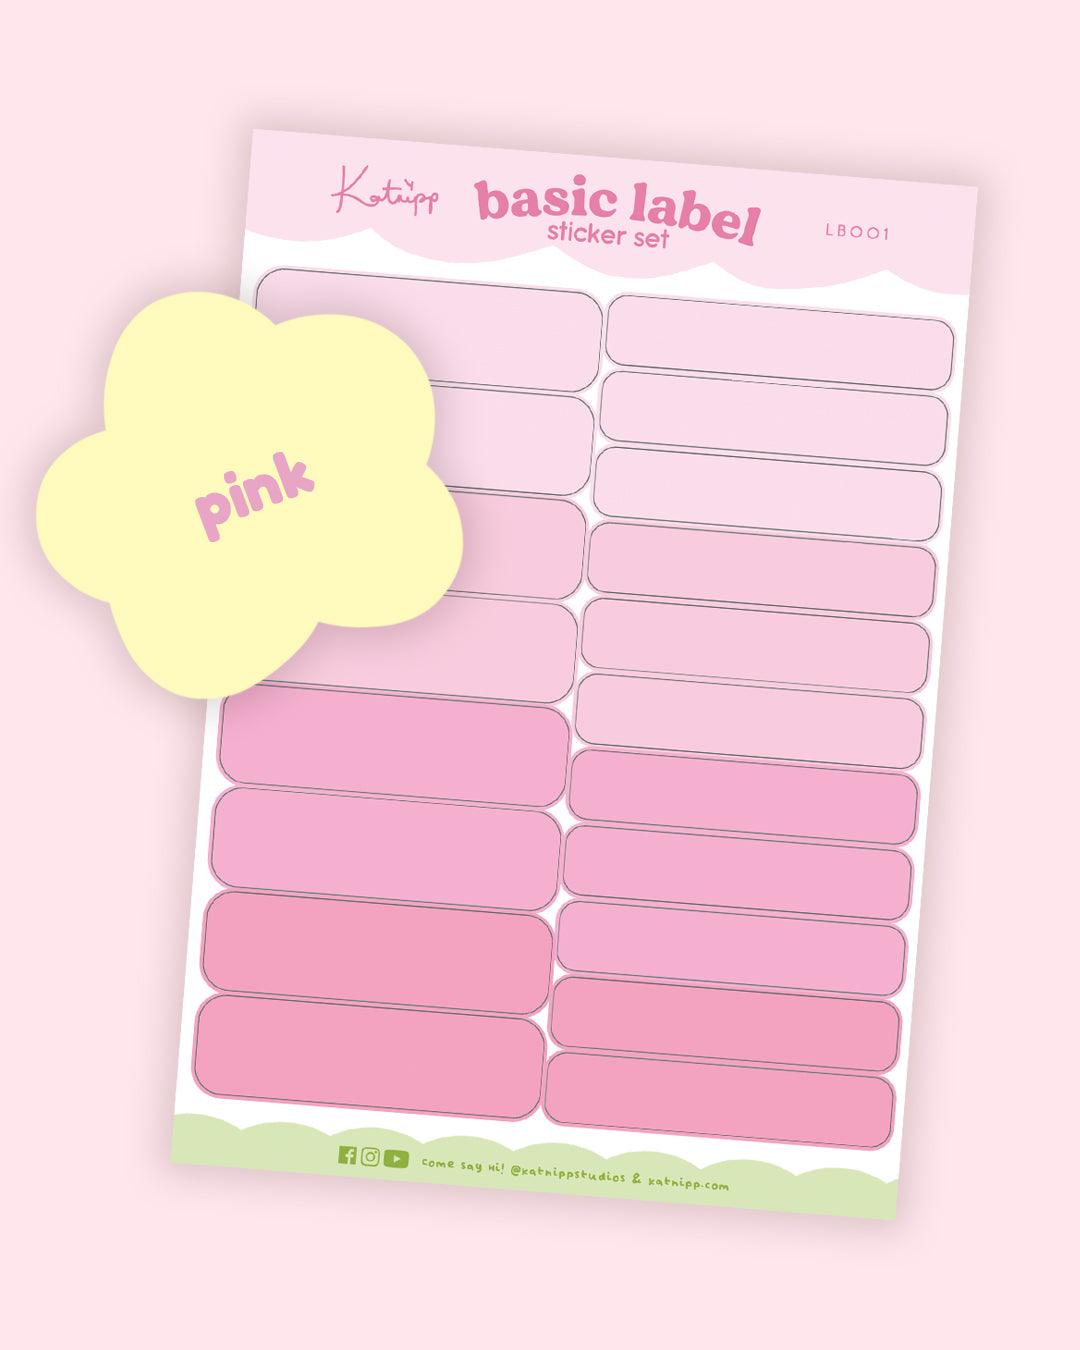 Charming Organisation Label Stickers with vibrant designs, ideal for decluttering and categorising your space. 4